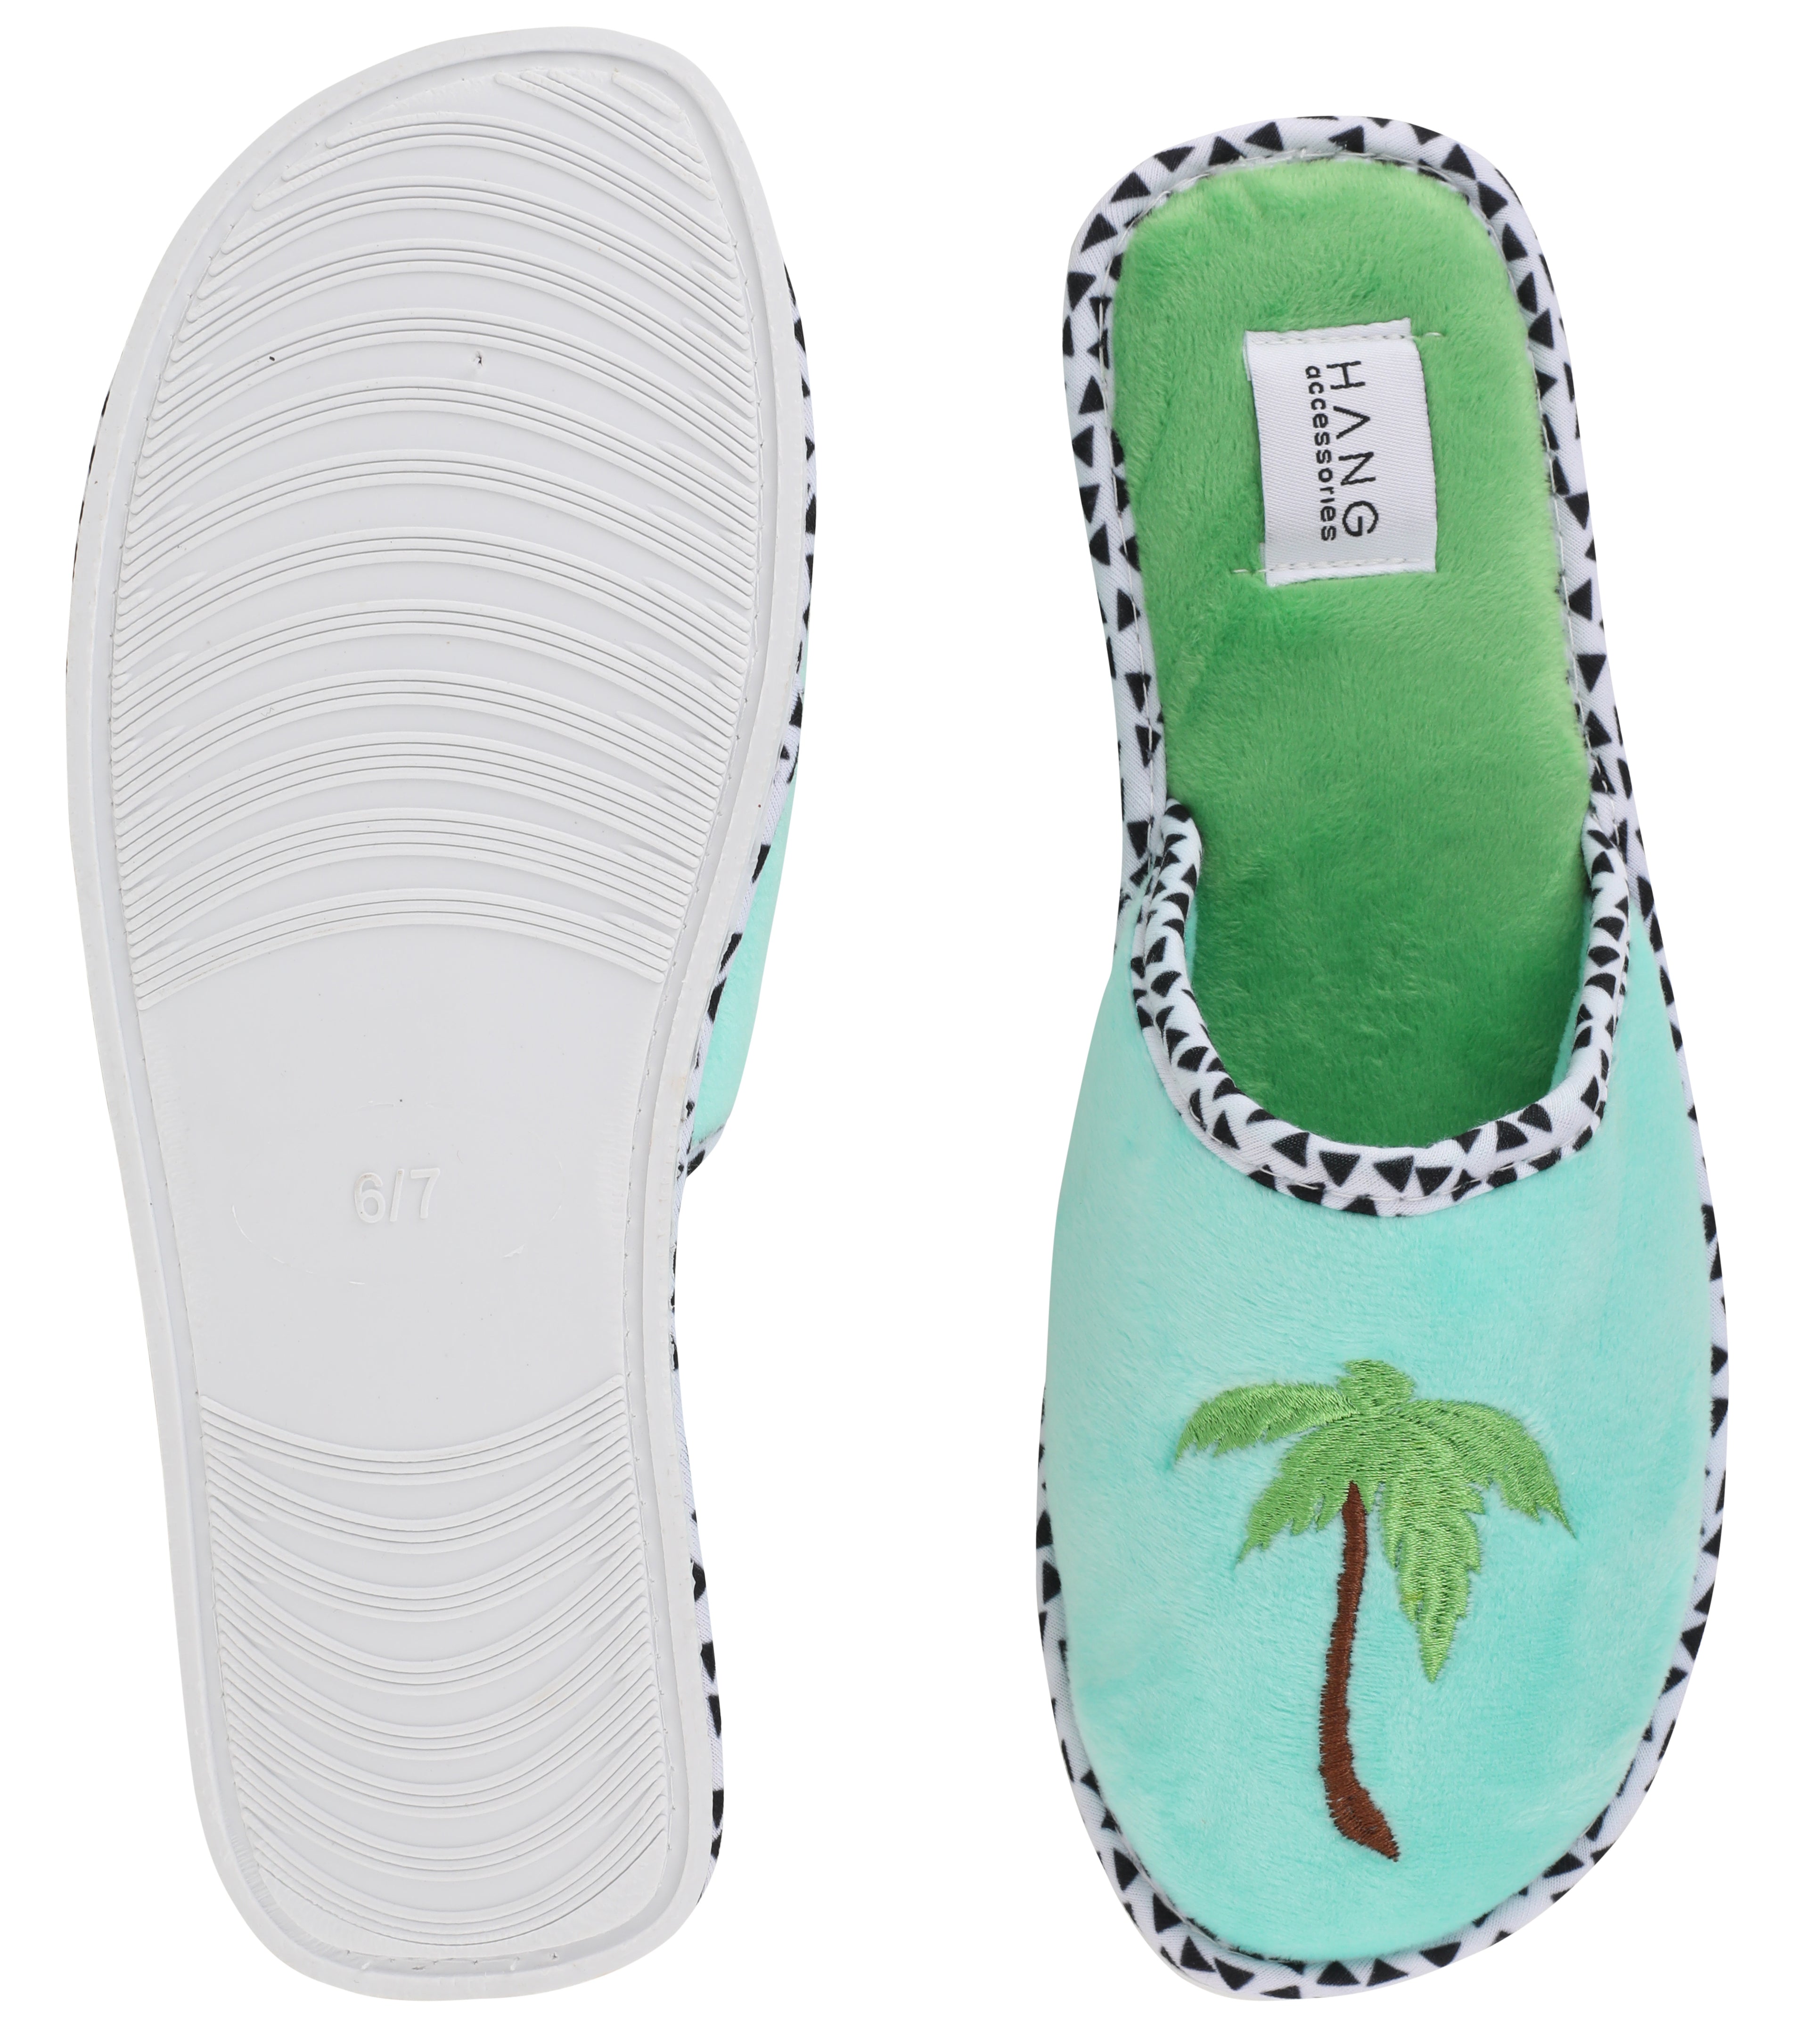 Foldable Travel Slippers Palm Tree